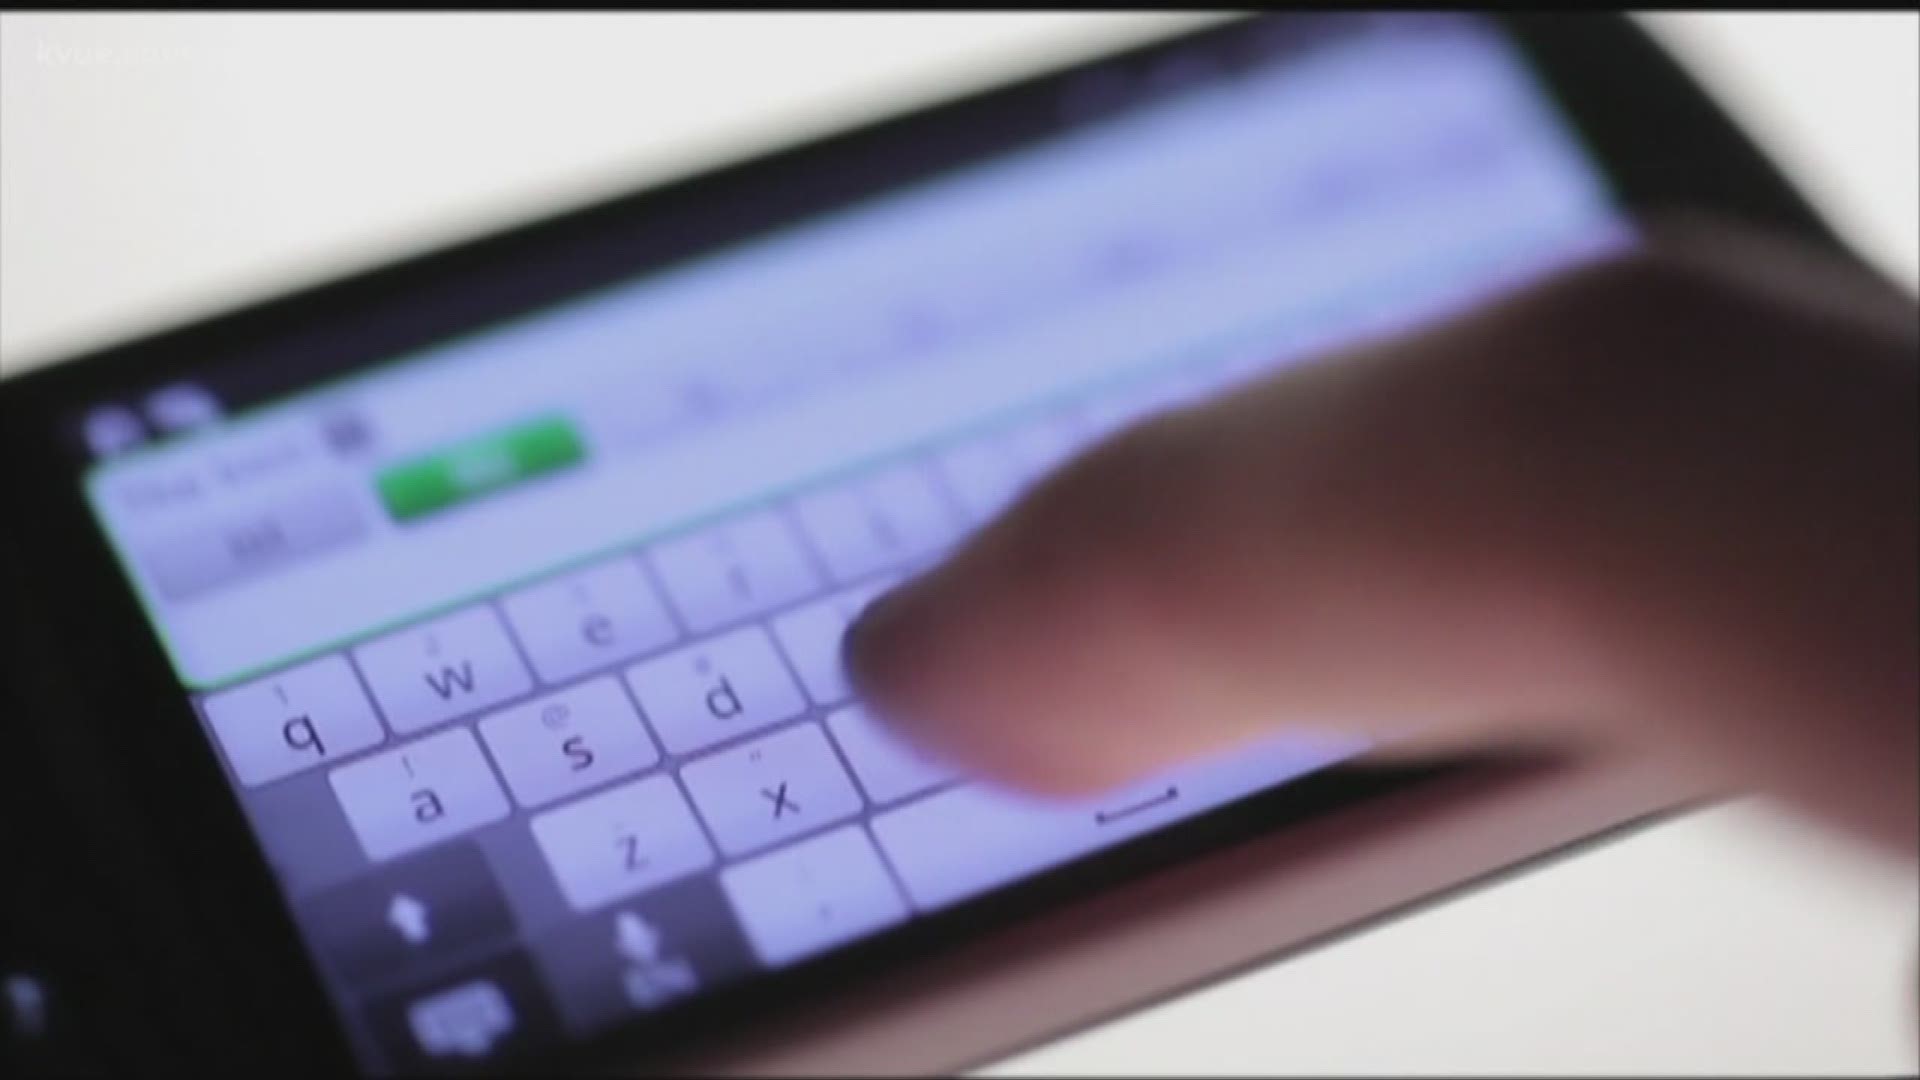 Austin-based text messaging firm 'True Dialogue' is thought to be responsible for the leak.